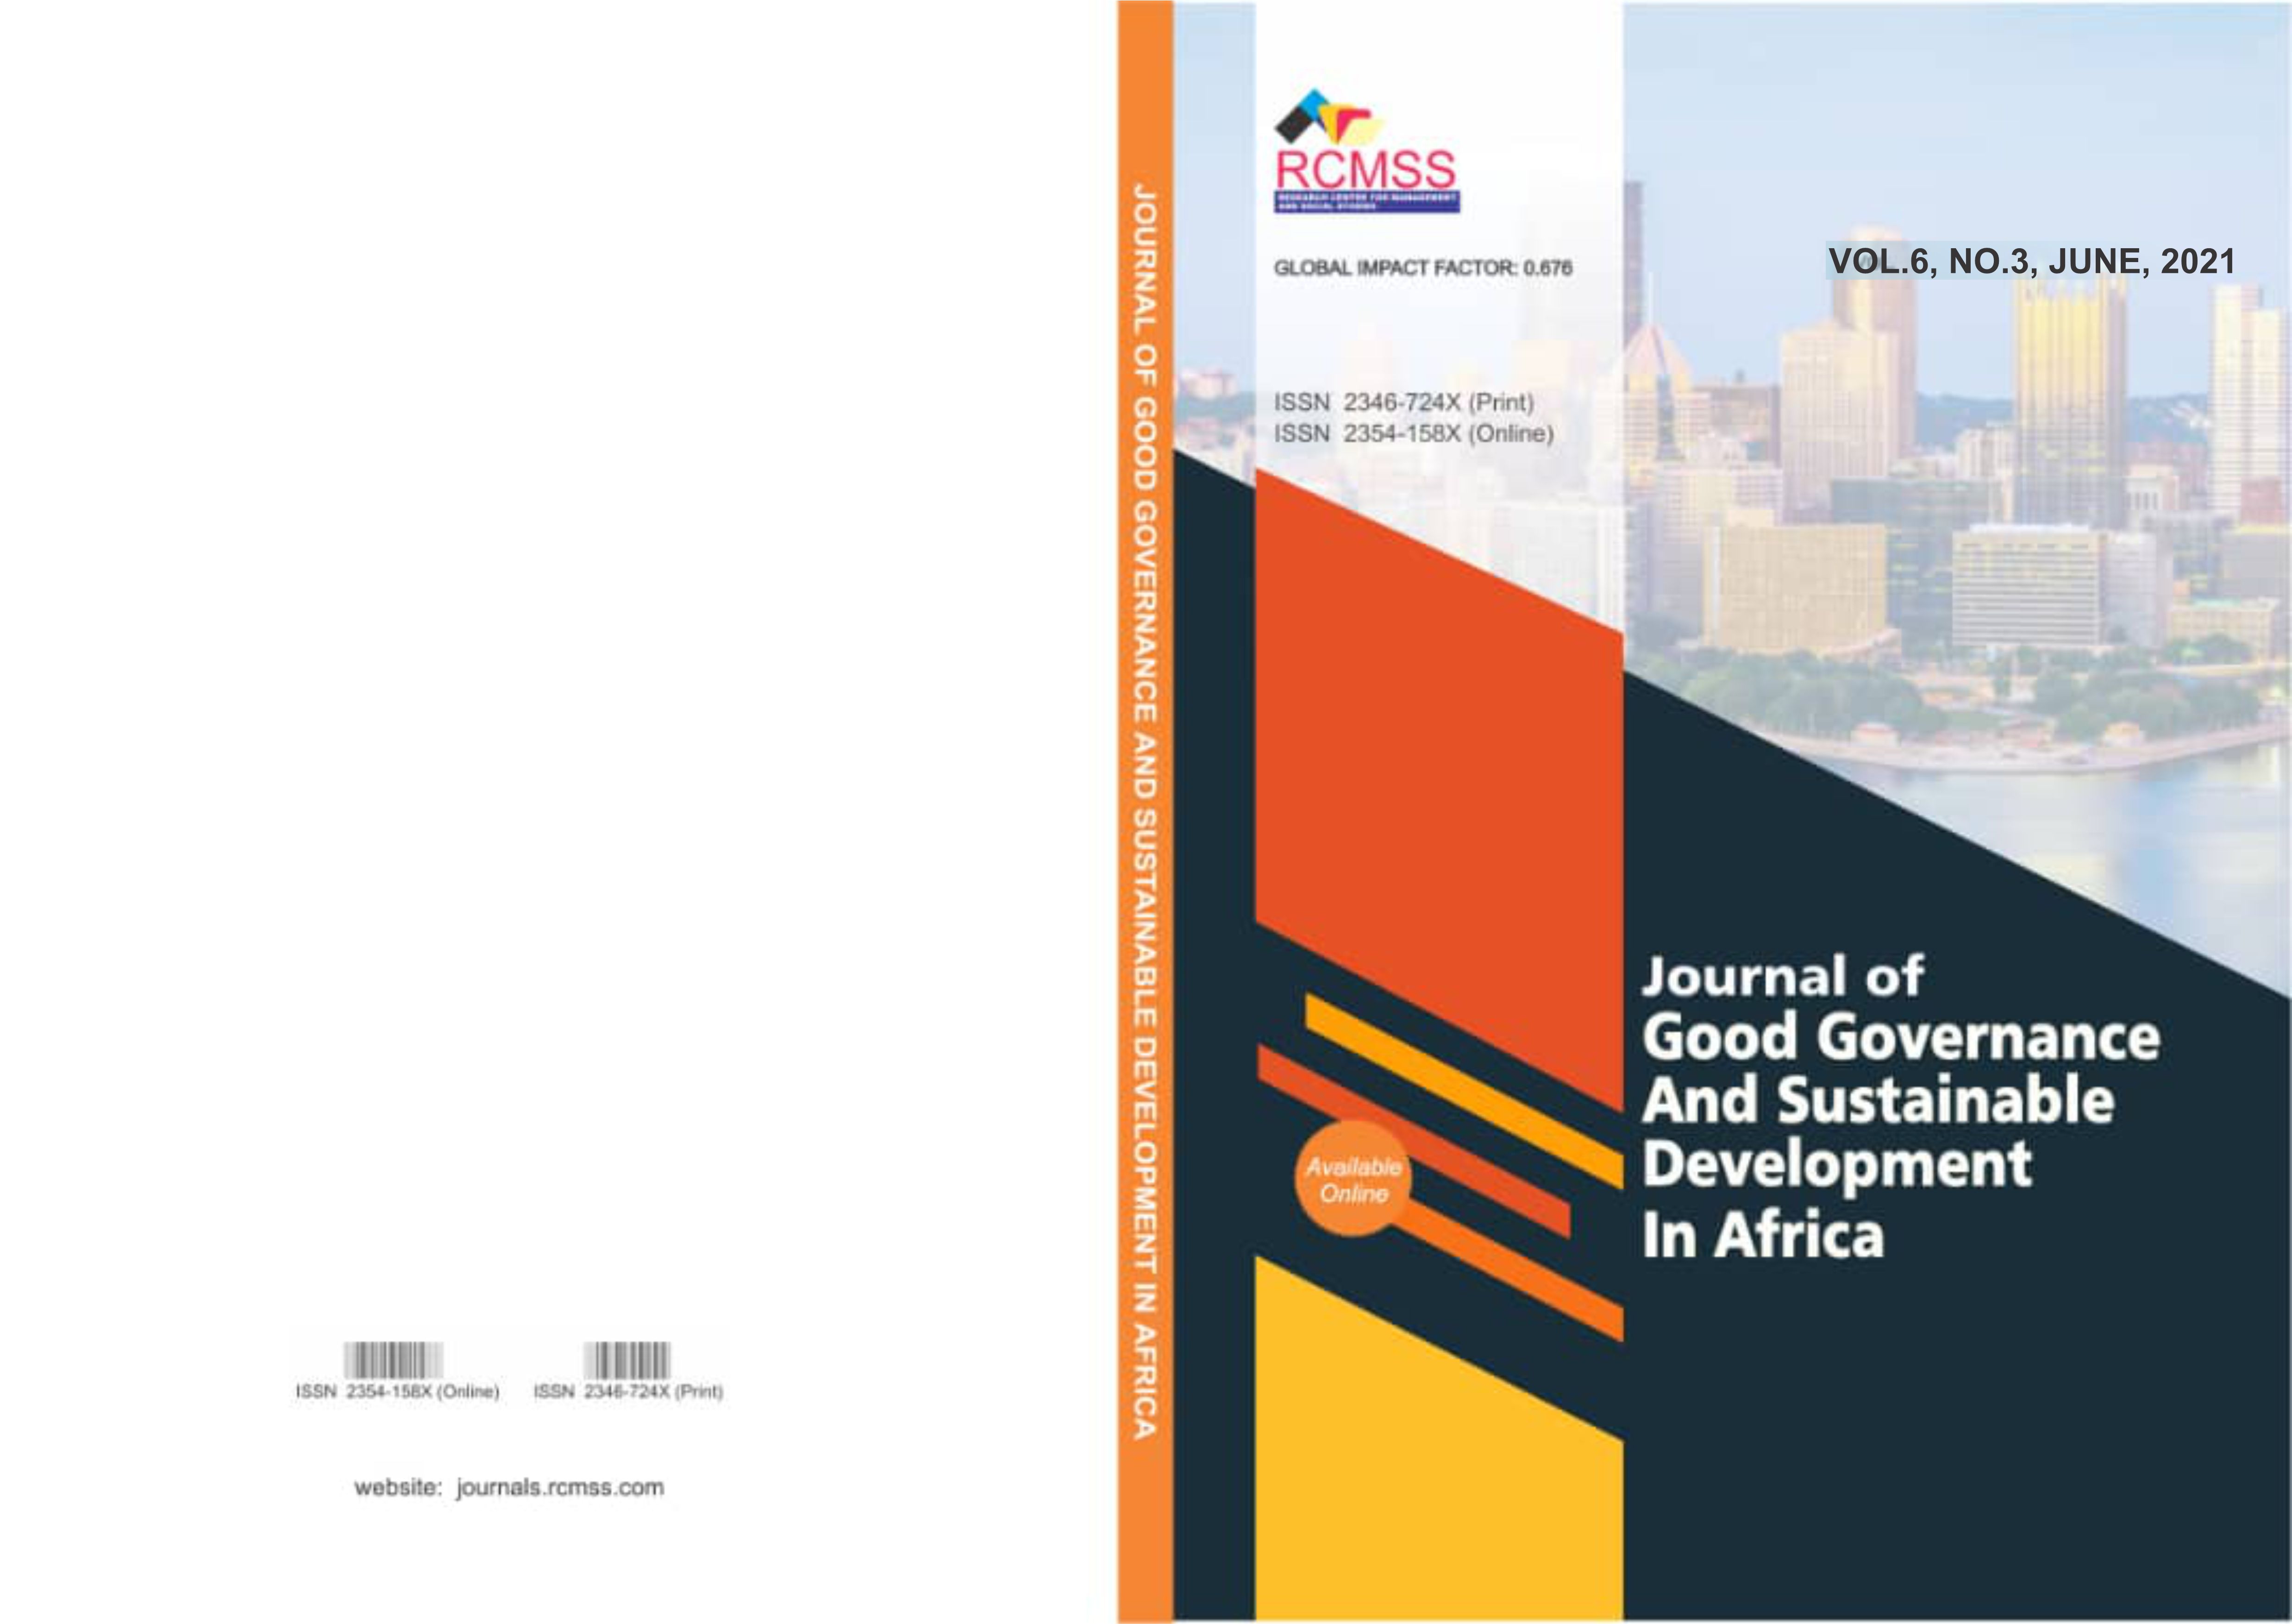 					View Vol. 6 No. 3 (2021): Journal of Good Governance and Sustainable Development in Africa (JGGSDA)
				